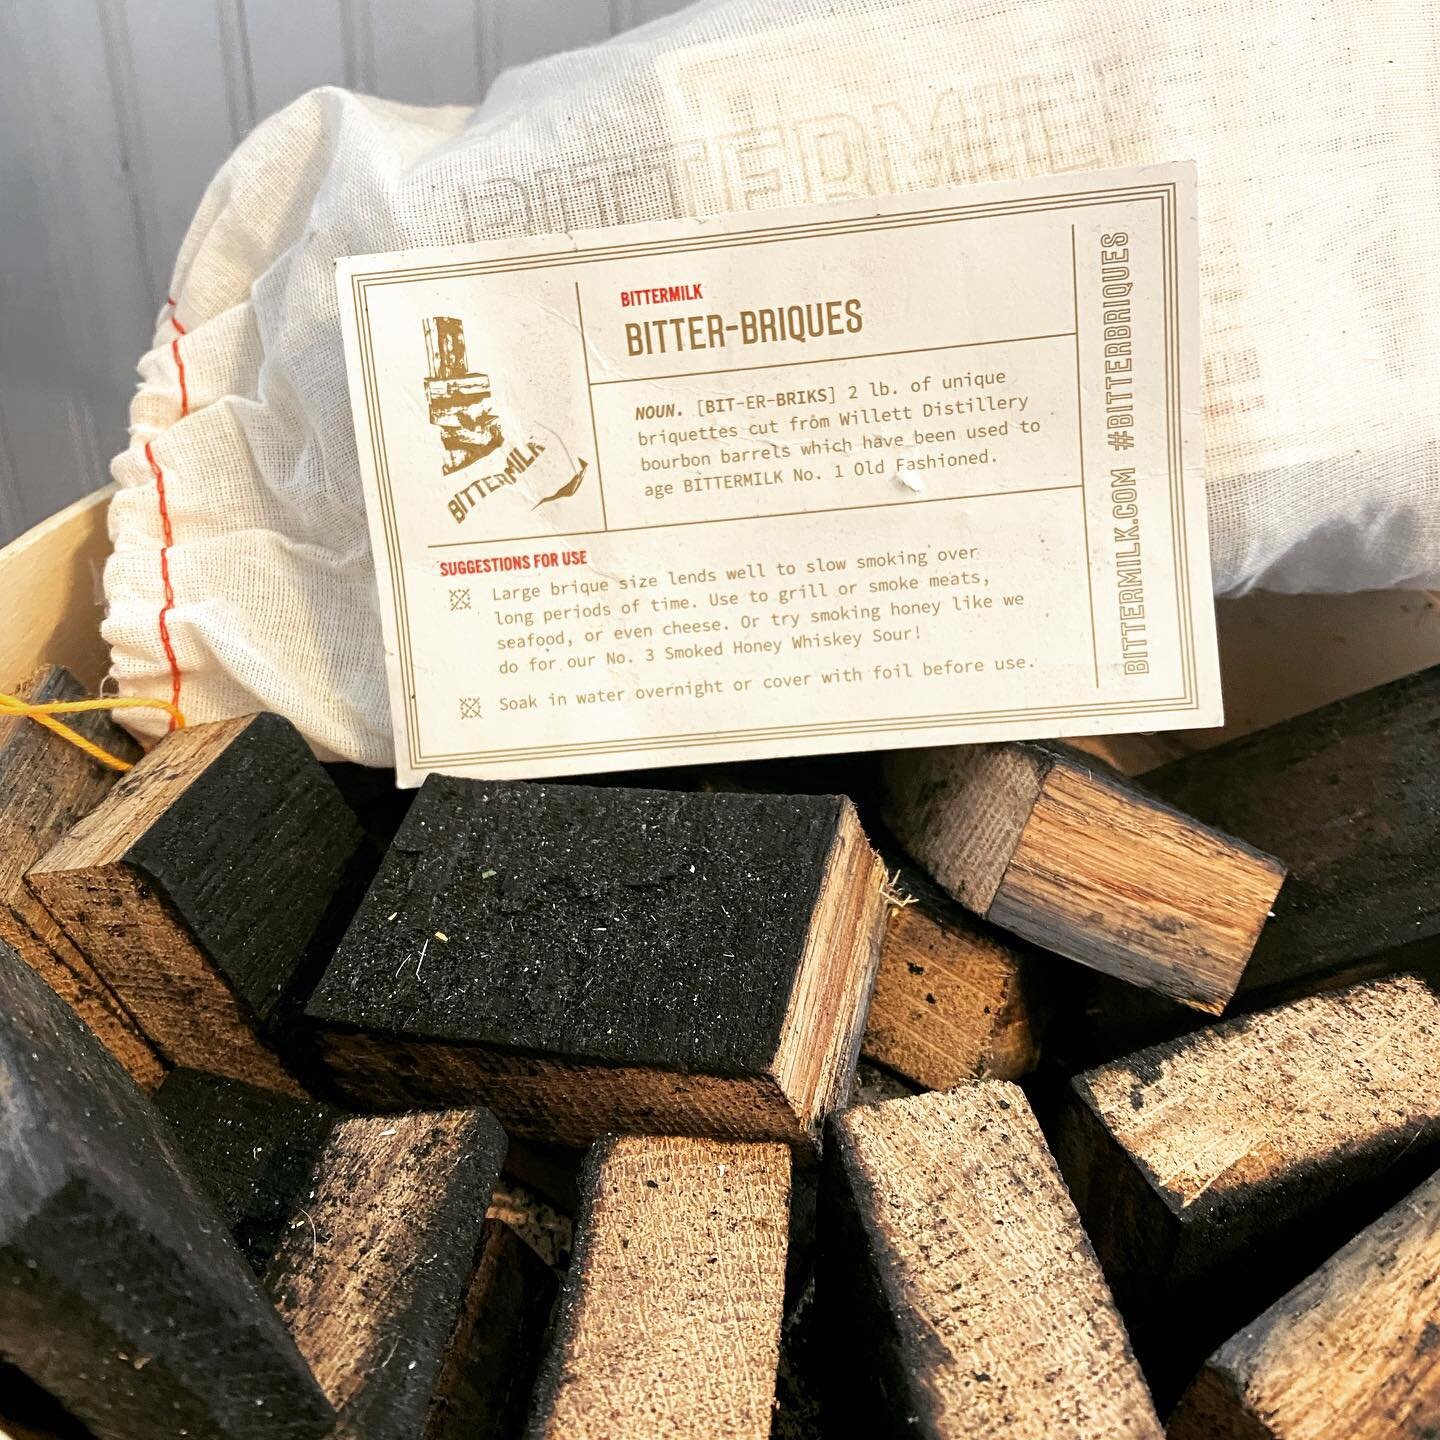 Get dad a lump coal this year for Father&rsquo;s Day! @drinkbittermilk Bitter-briques will add a smoky bourbon flavor to your grilled meats and veggies #tableandtonic #bitters #fathersday #capecharles